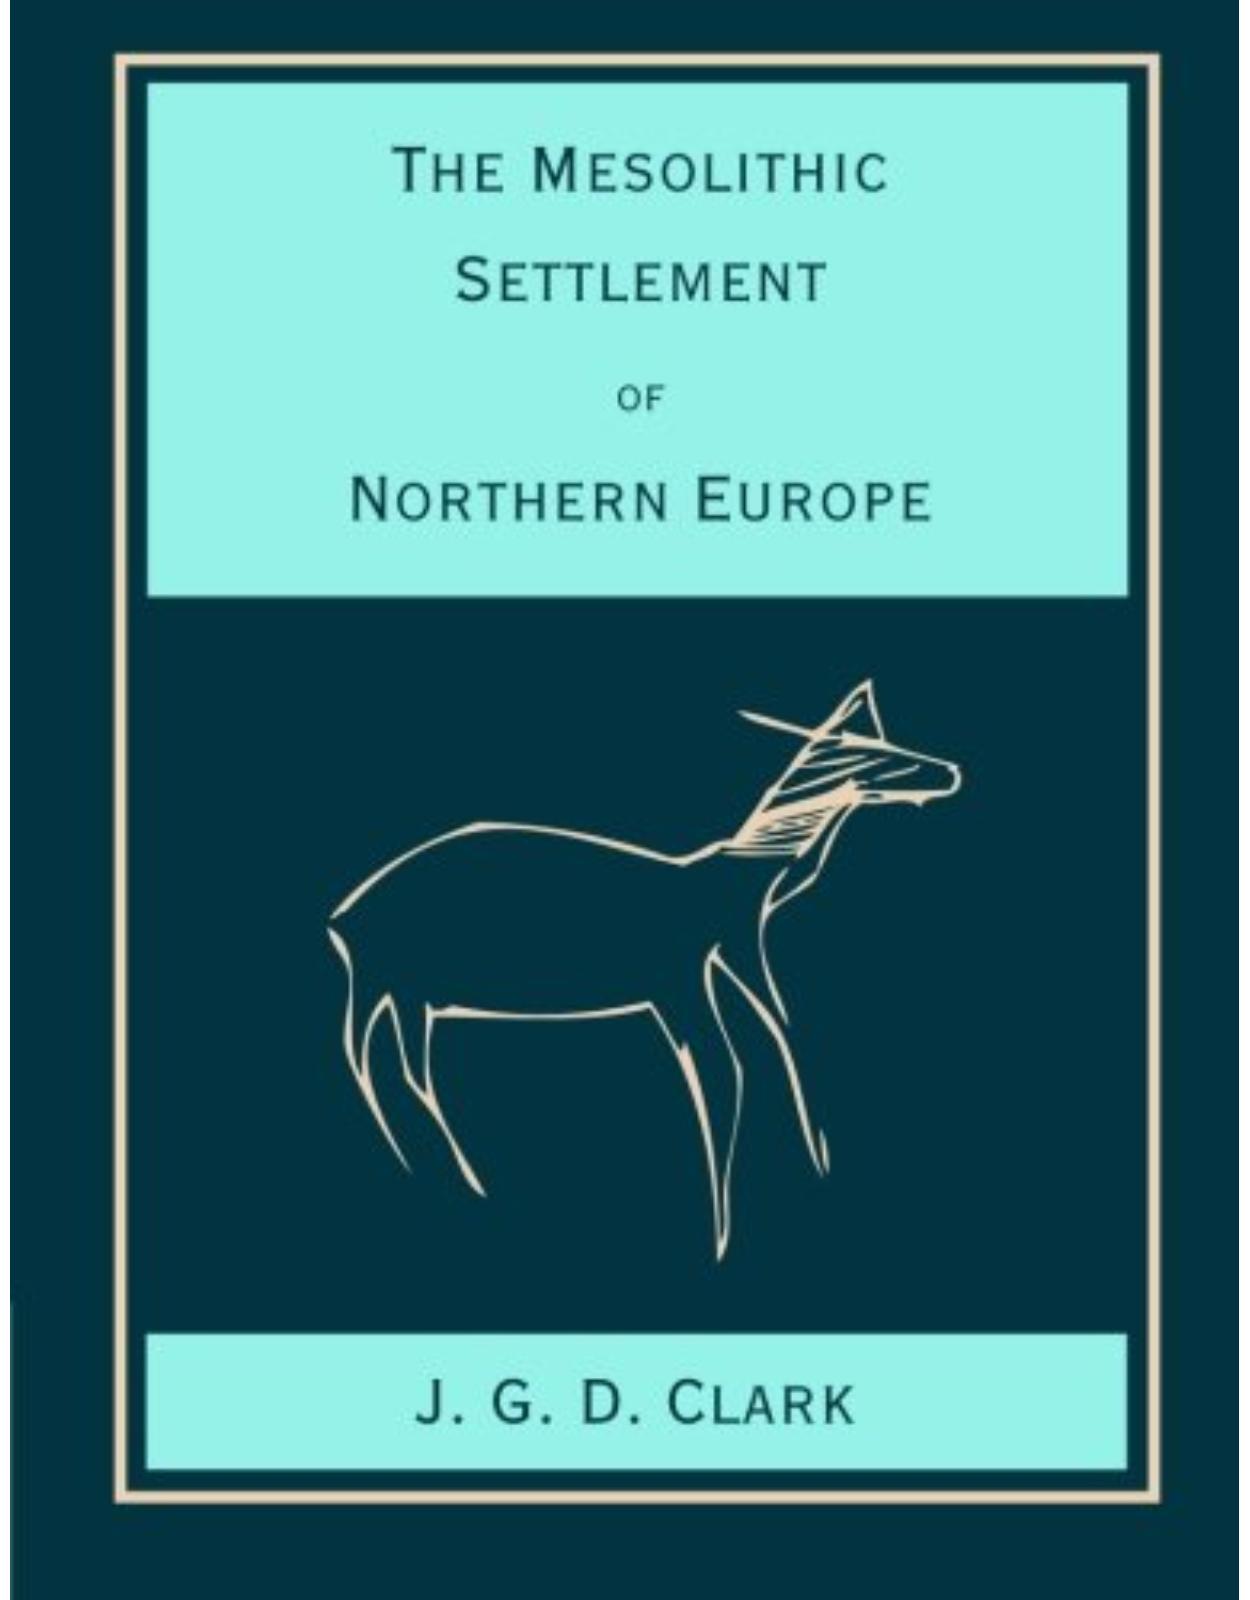 The Mesolithic Settlement of Northern Europe: A Study of the Food-gathering Peoples of Northern Europe during the Early Post-glacial Period